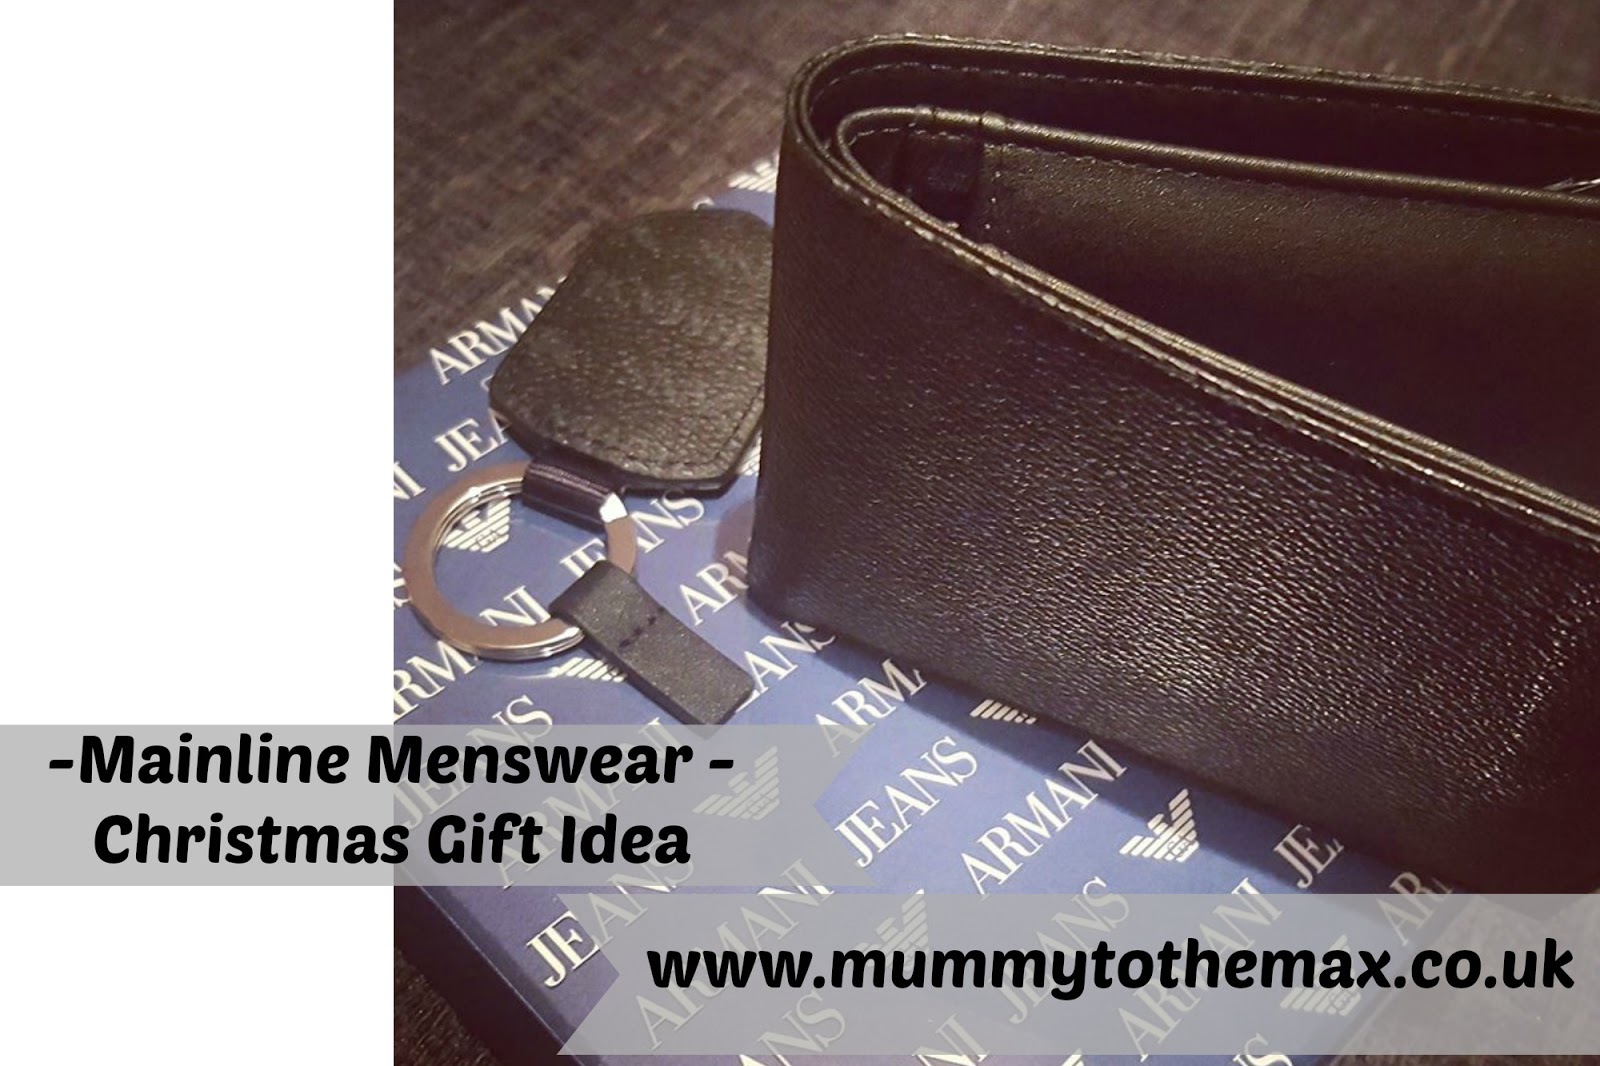 Mainline Menswear - Christmas Gift Idea - MUMMY TO THE MAX